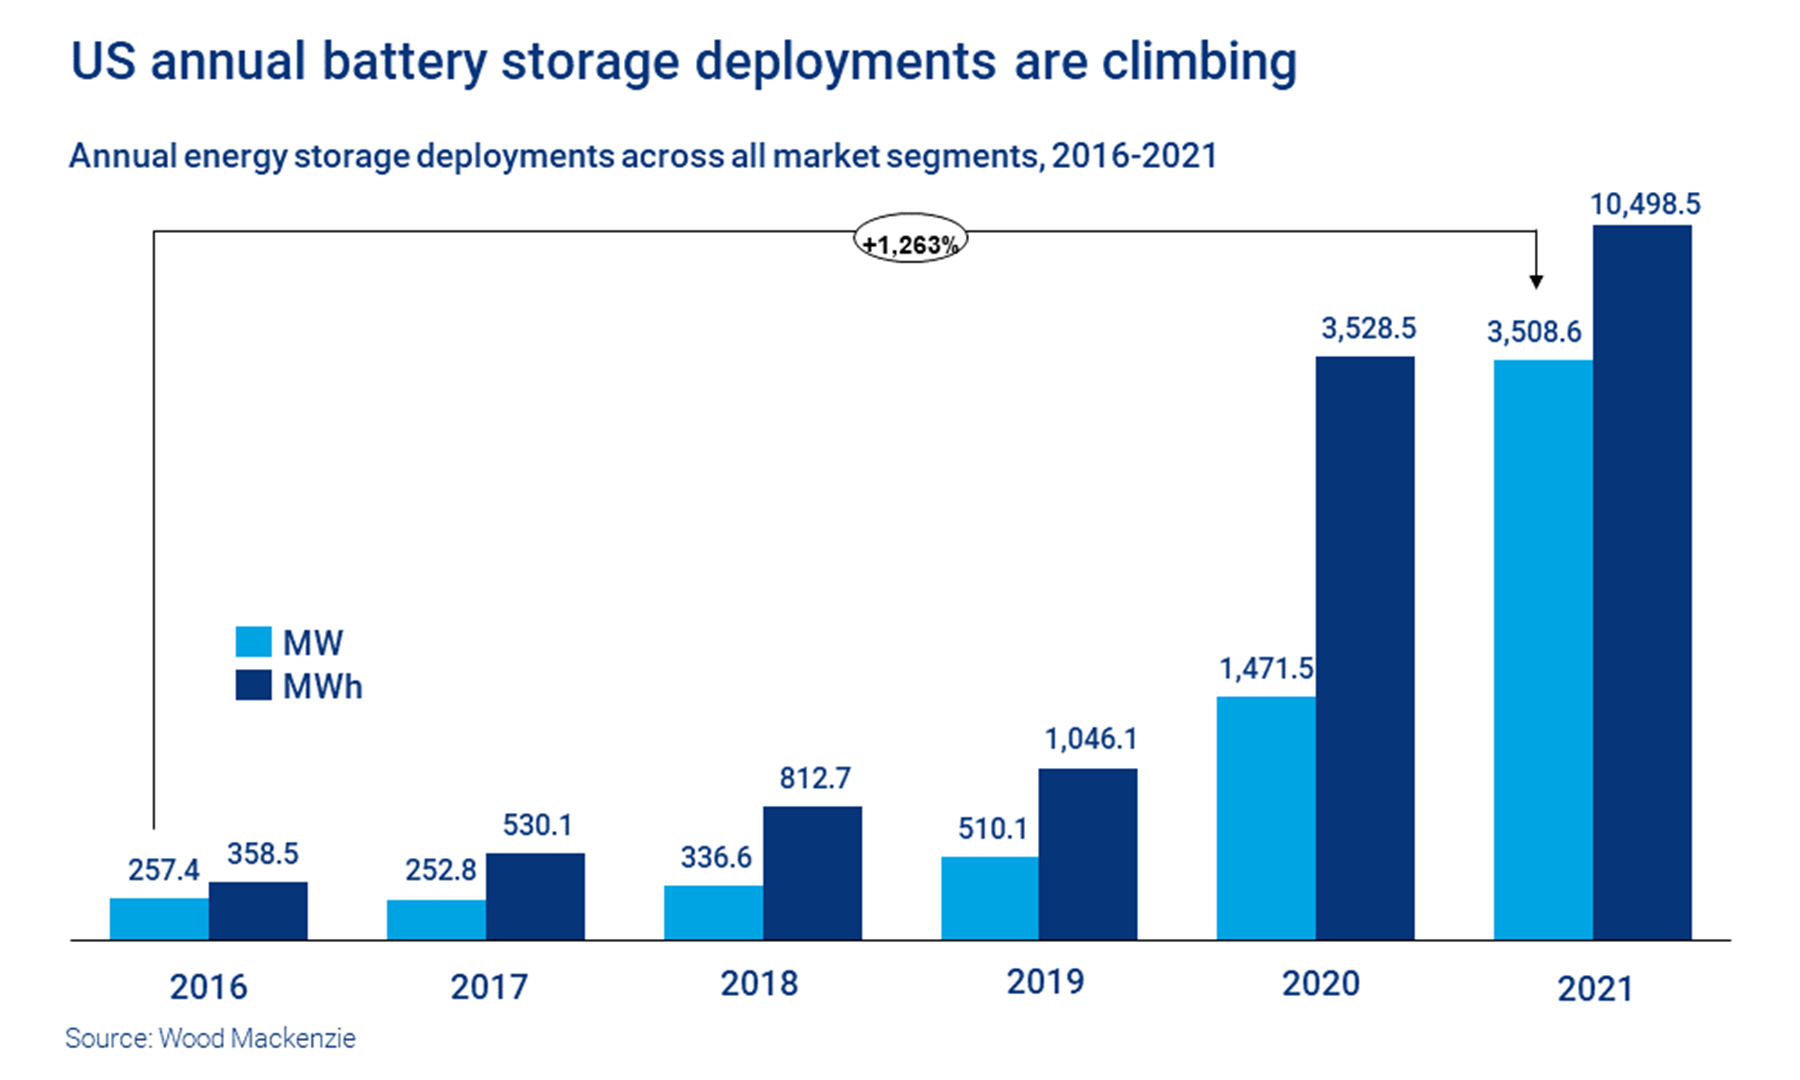 https://www.woodmac.com/siteassets/article-images/2022/q1/pr/us-annual-battery-storage-deployments-are-climbing-.png?width=1800&height=0&mode=crop&center=0.5,0.5